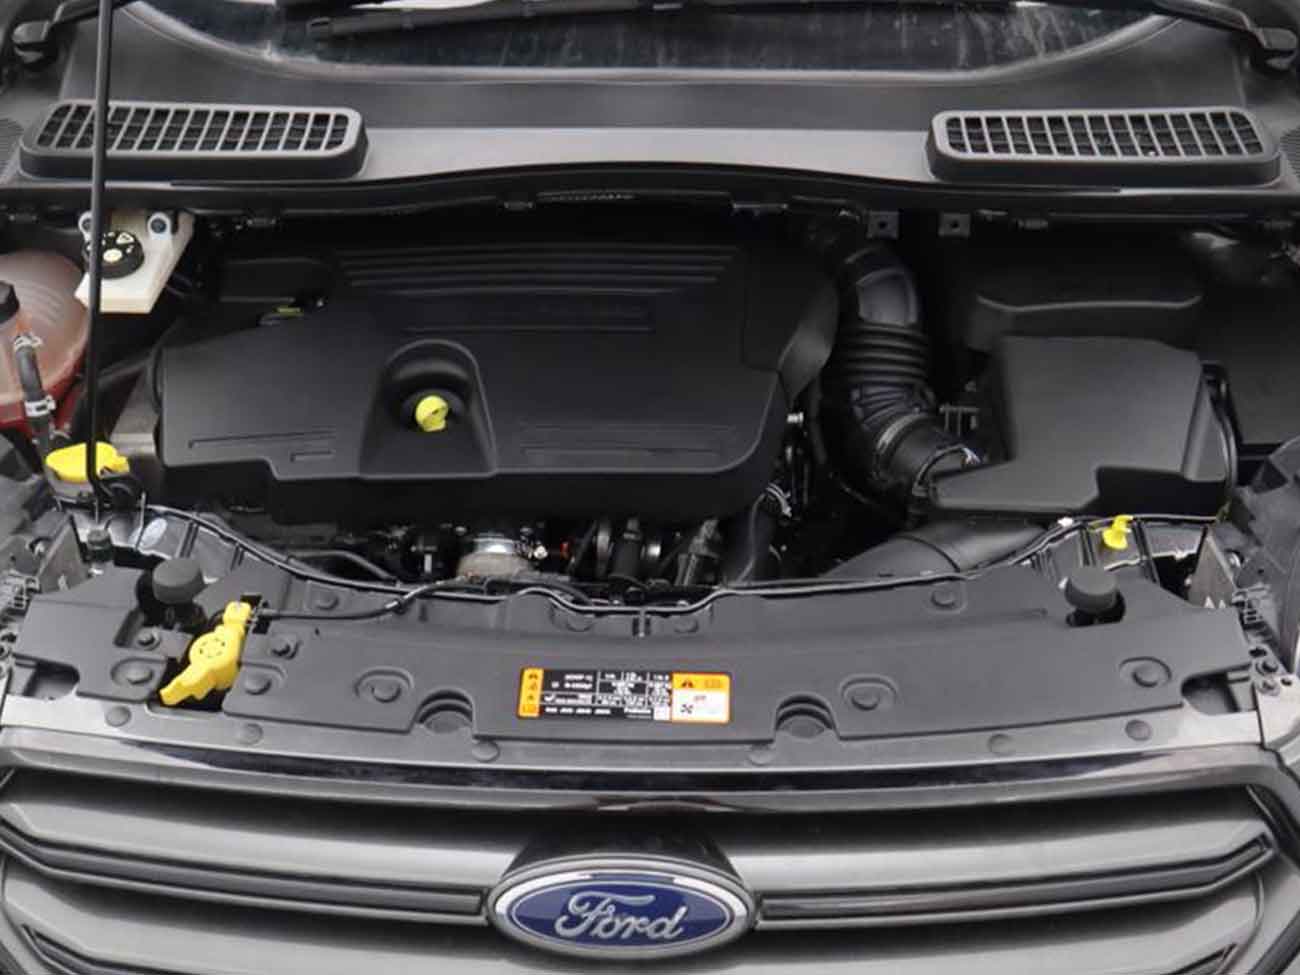 Image of engine of Land Rover Evoque